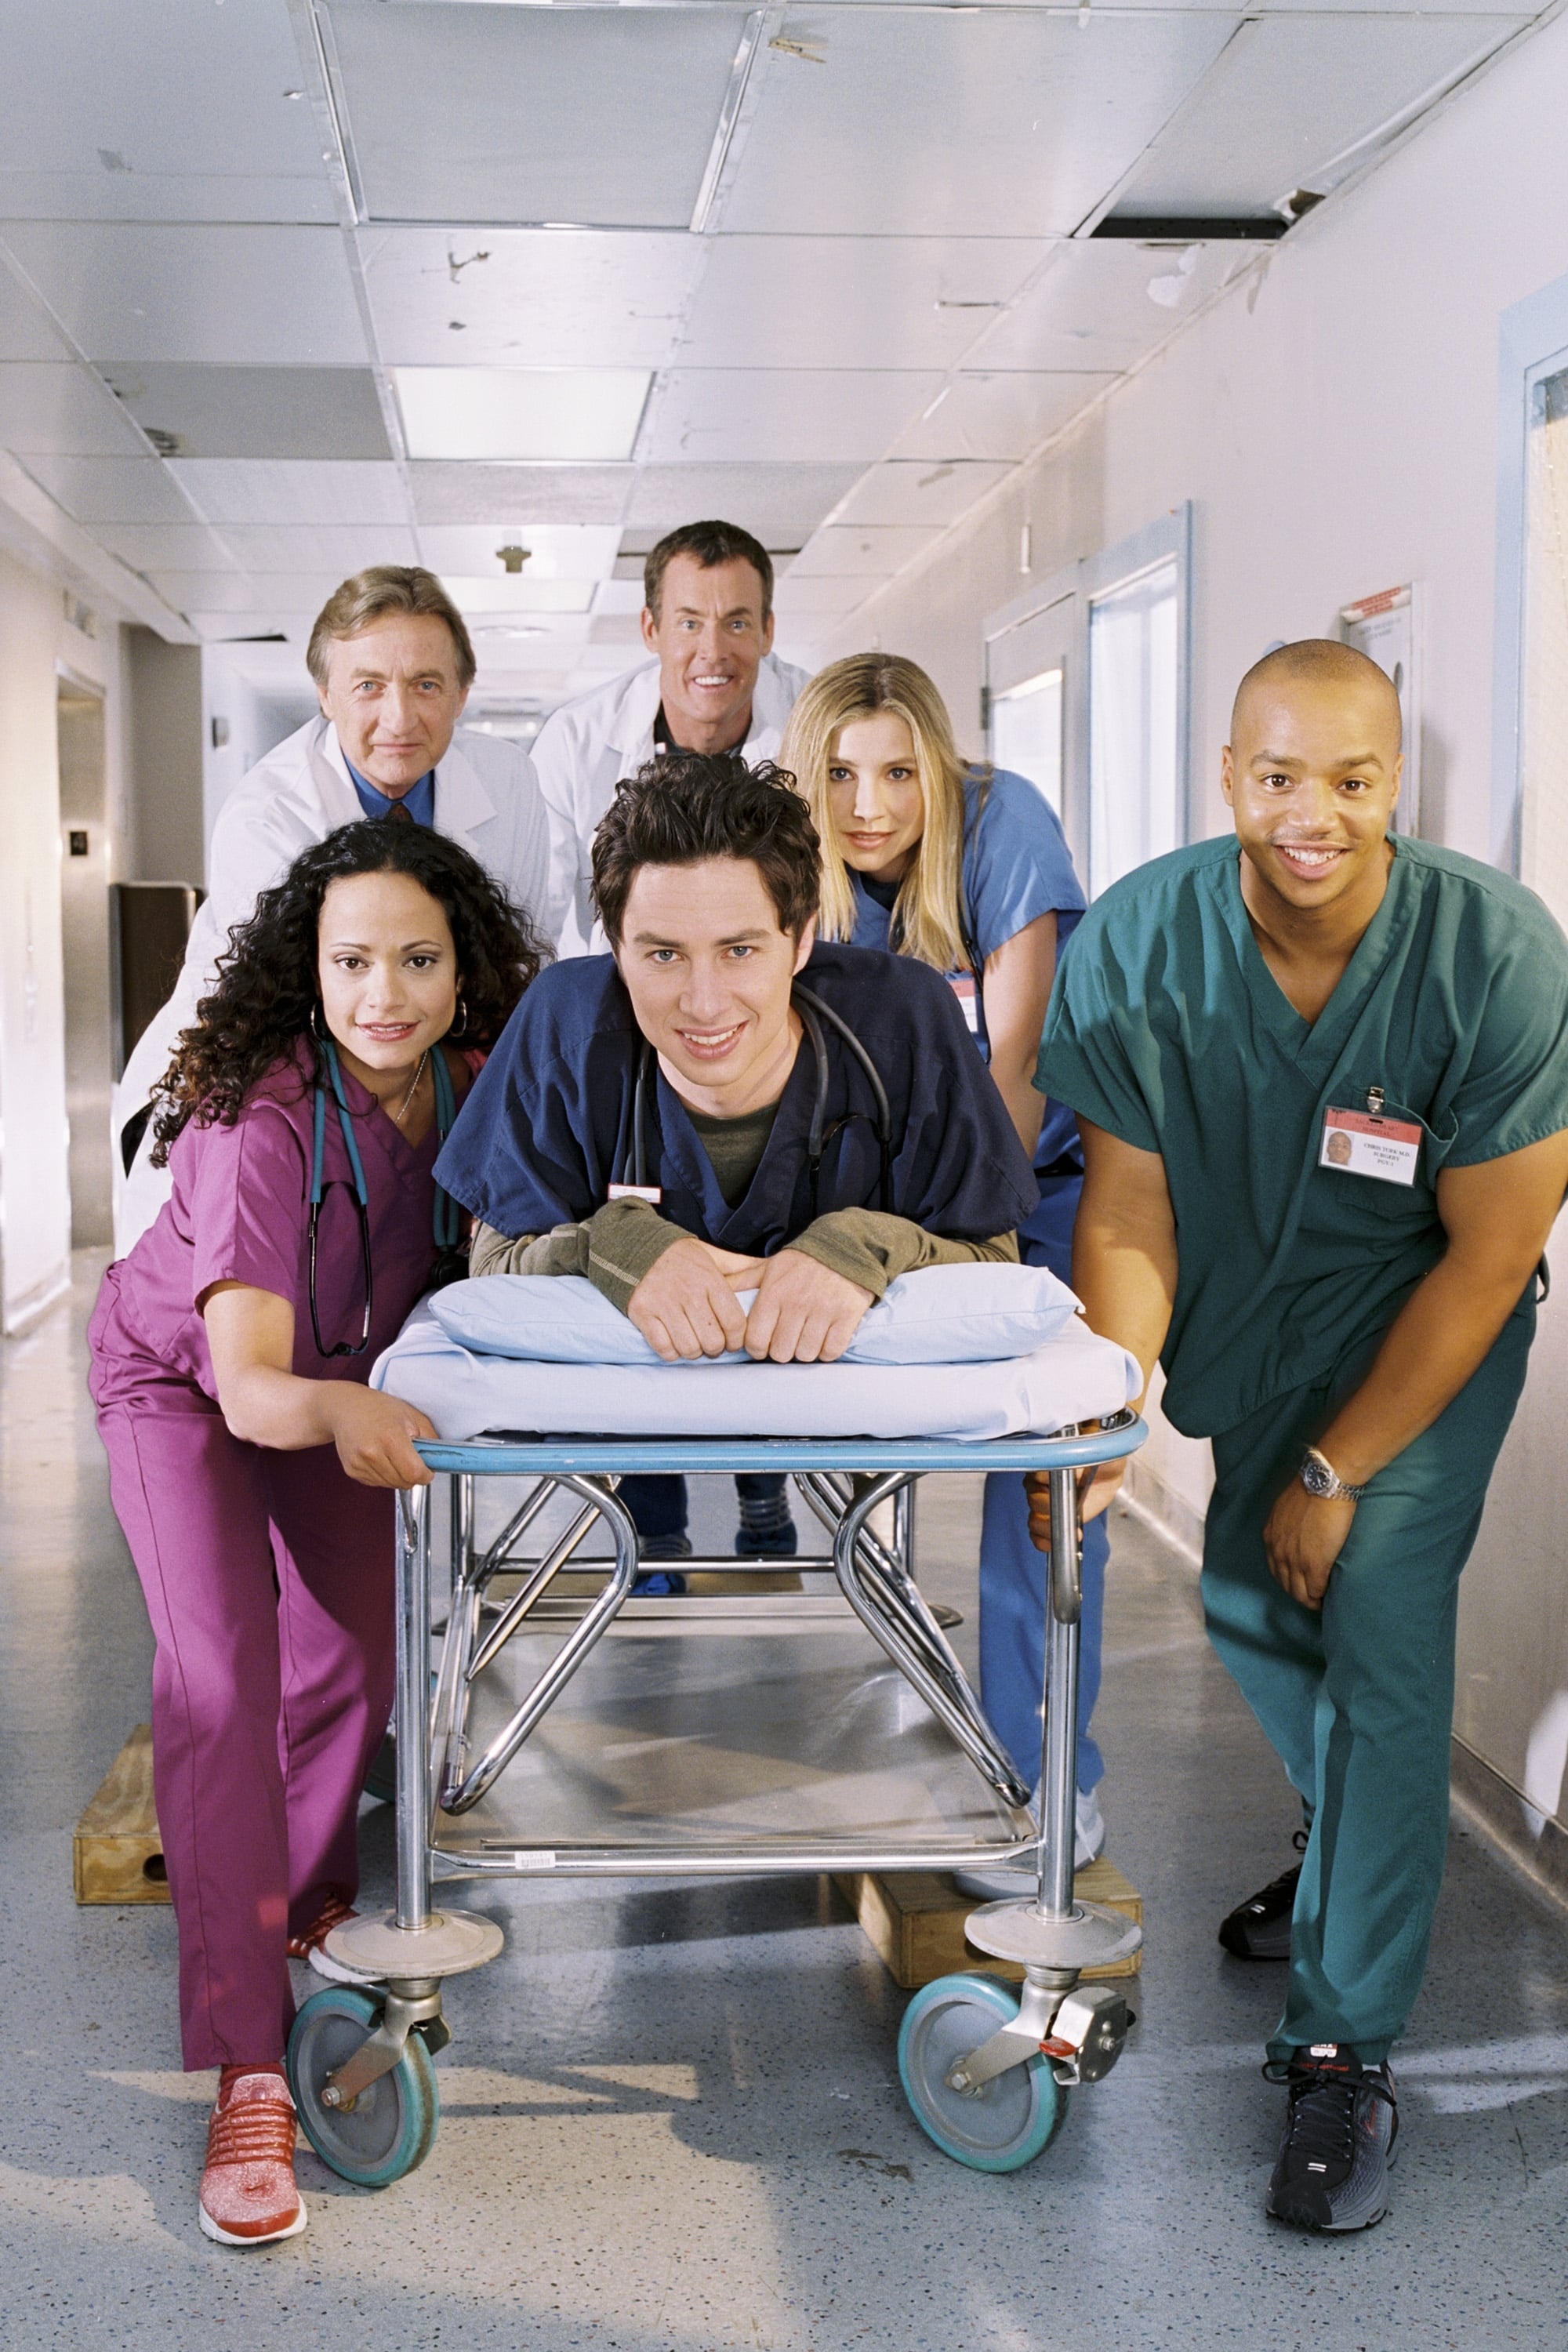 Scrubs (TV Series): The series follows the lives of employees at the fictional Sacred Heart Hospital, which is a teaching hospital. 2000x3000 HD Background.